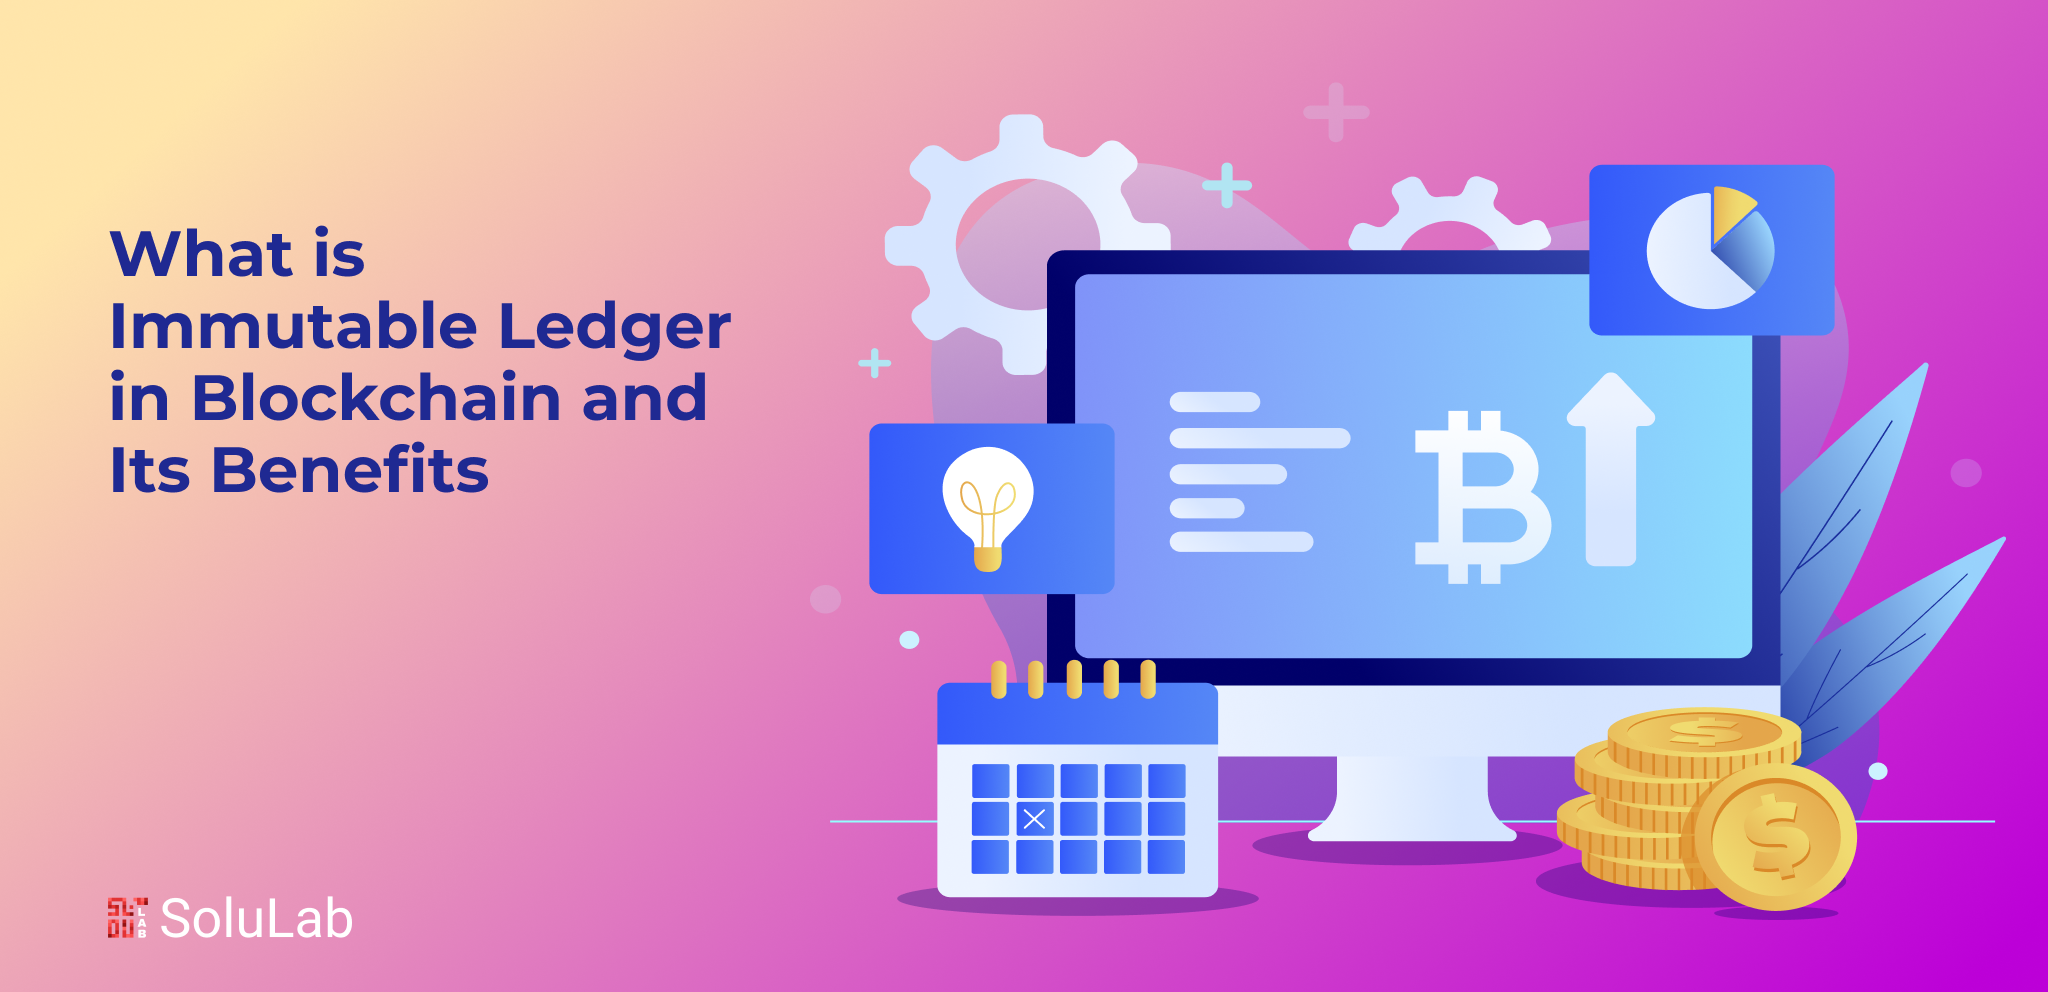 What is Immutable Ledger in Blockchain and Its Benefits